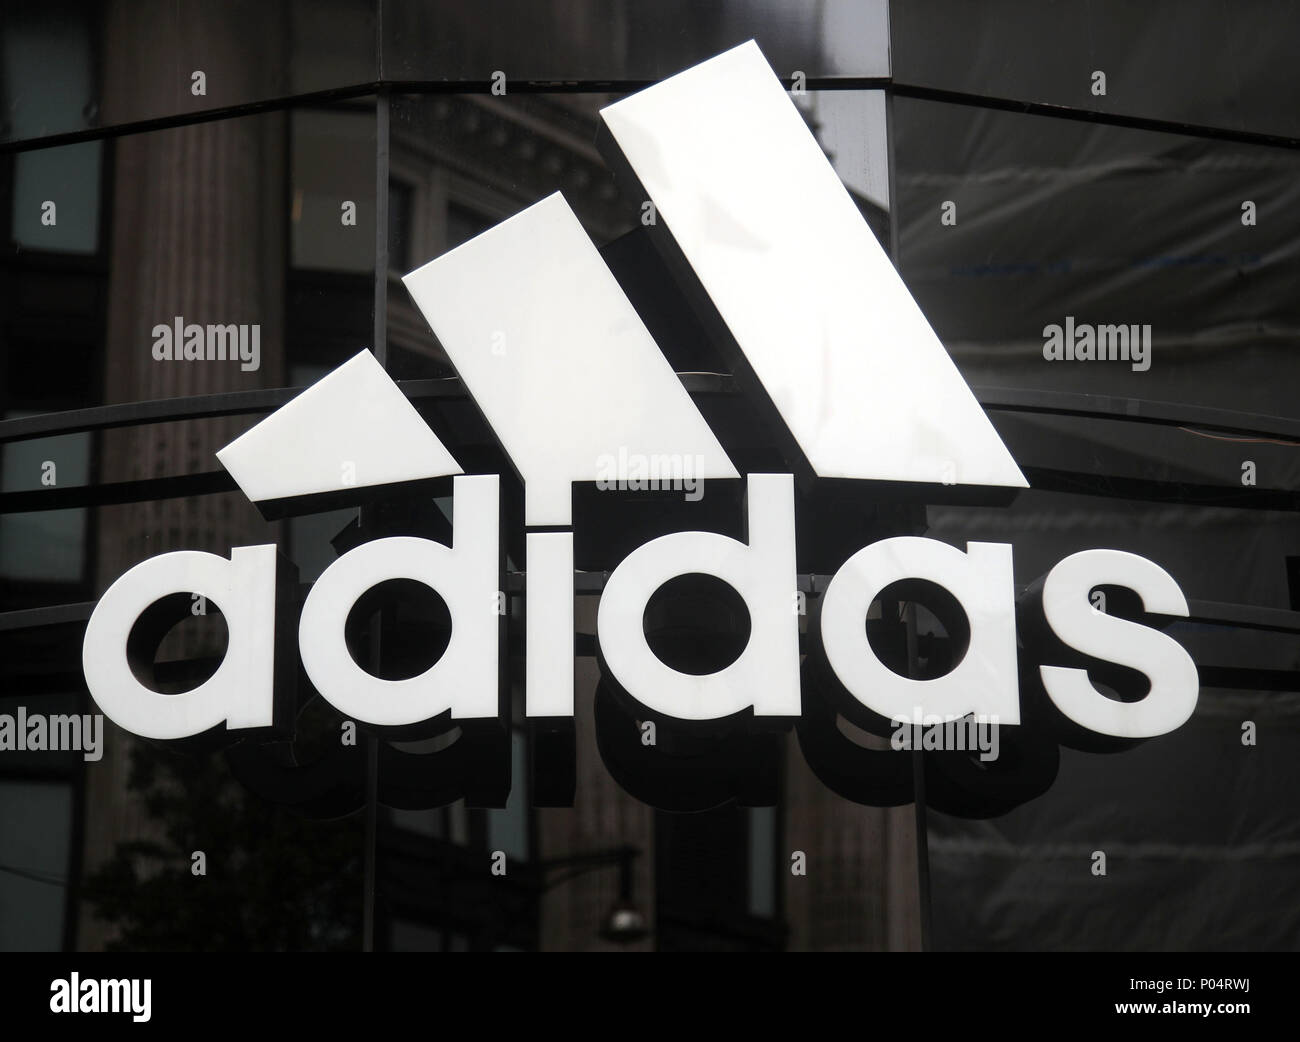 adidas store central london